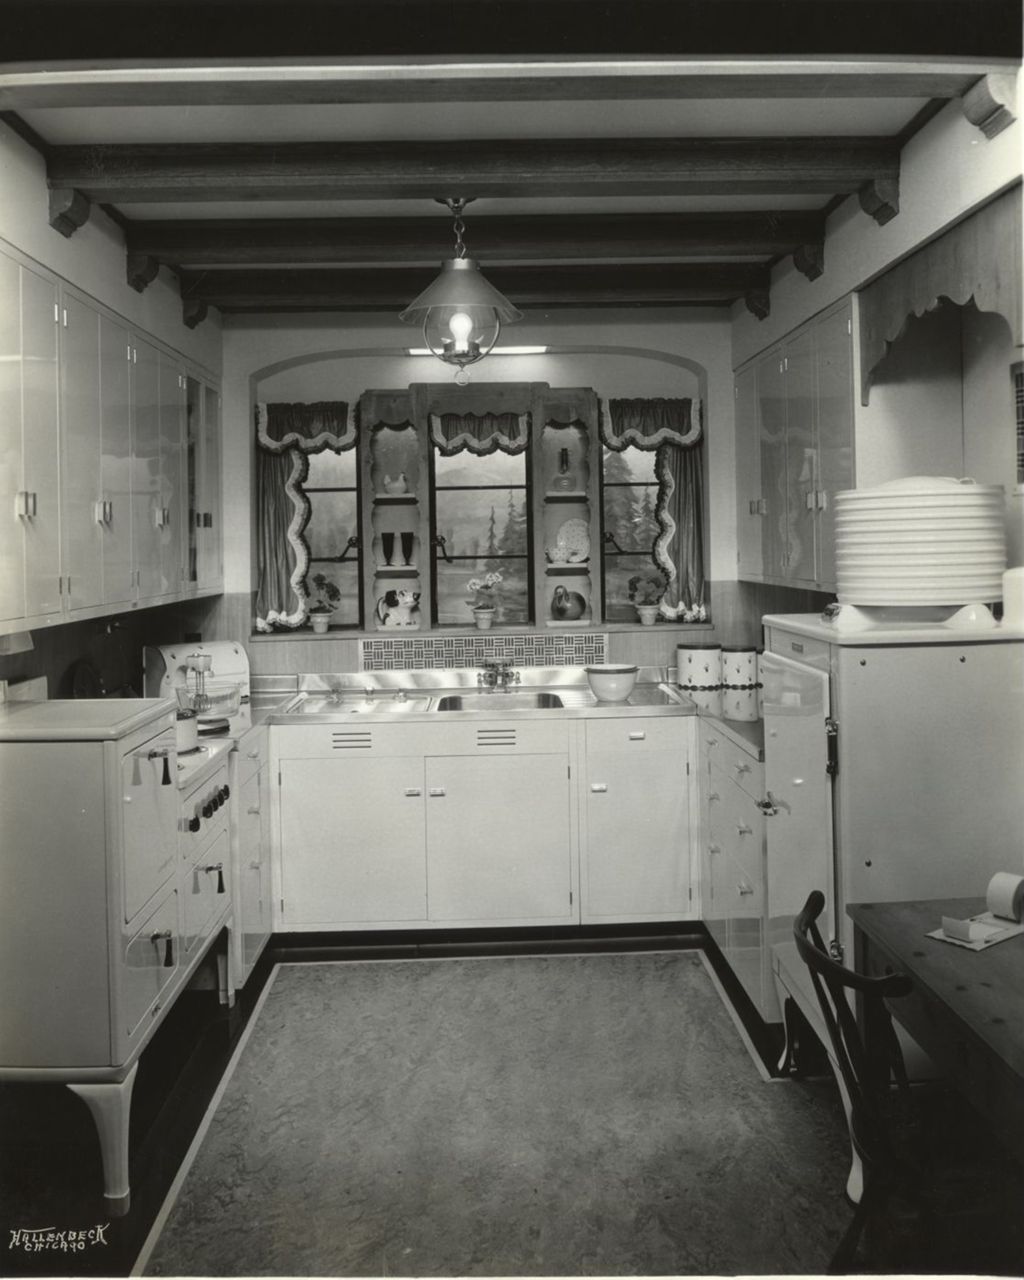 Model electric kitchen is one of the features of the General Electric exhibit